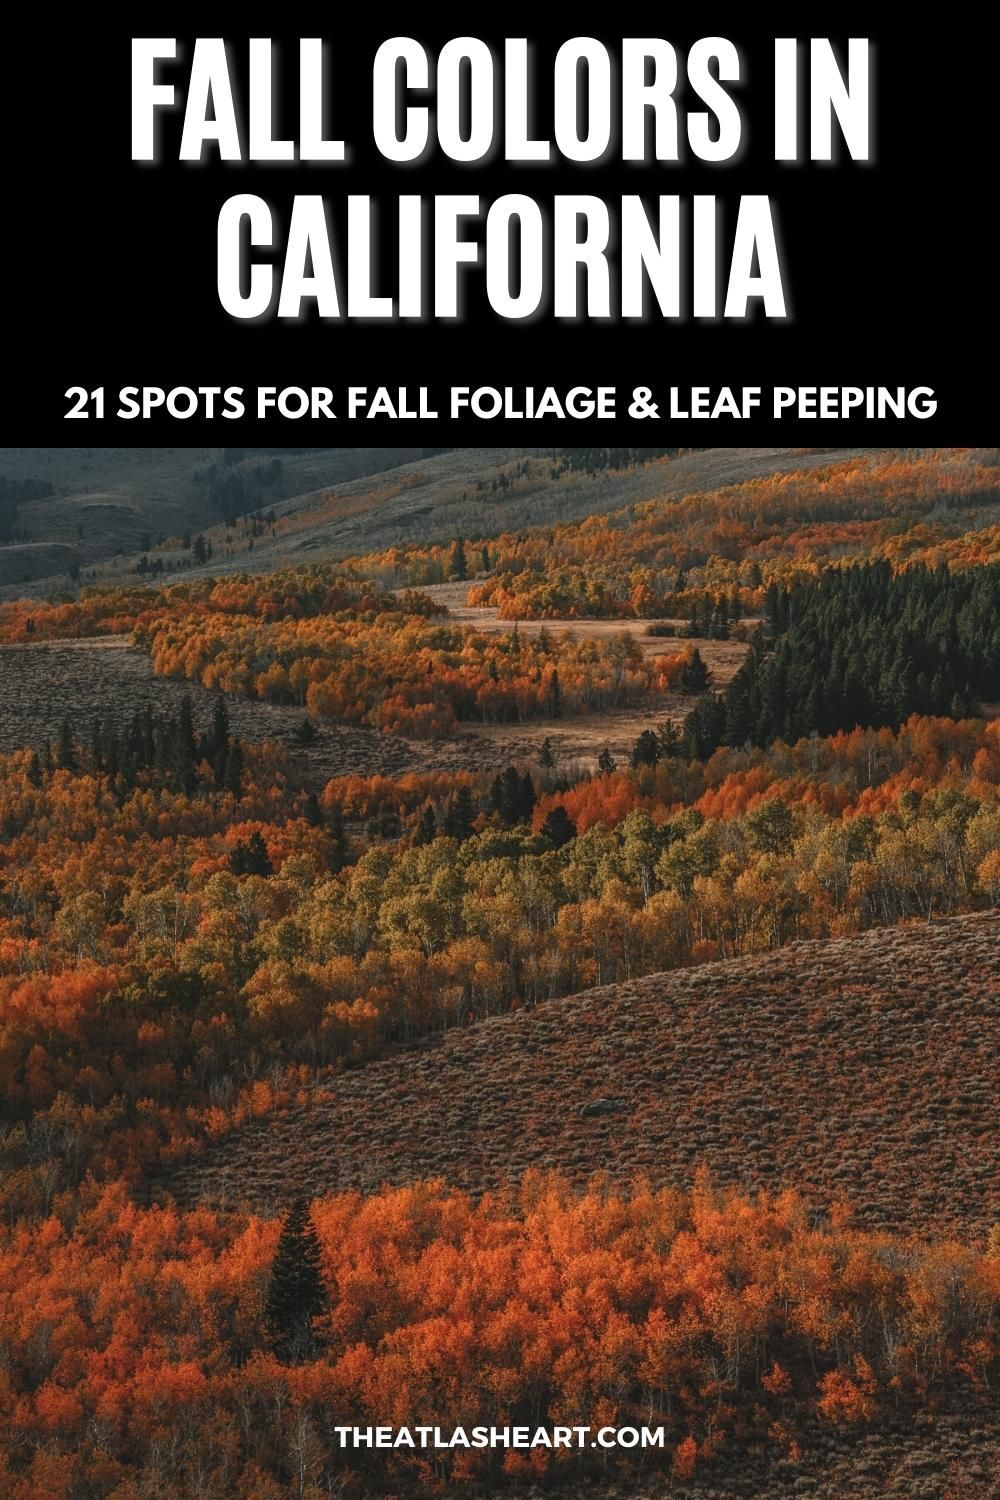 Where to See Fall Colors in California: 21 Spots for Fall Foliage & Leaf Peeping